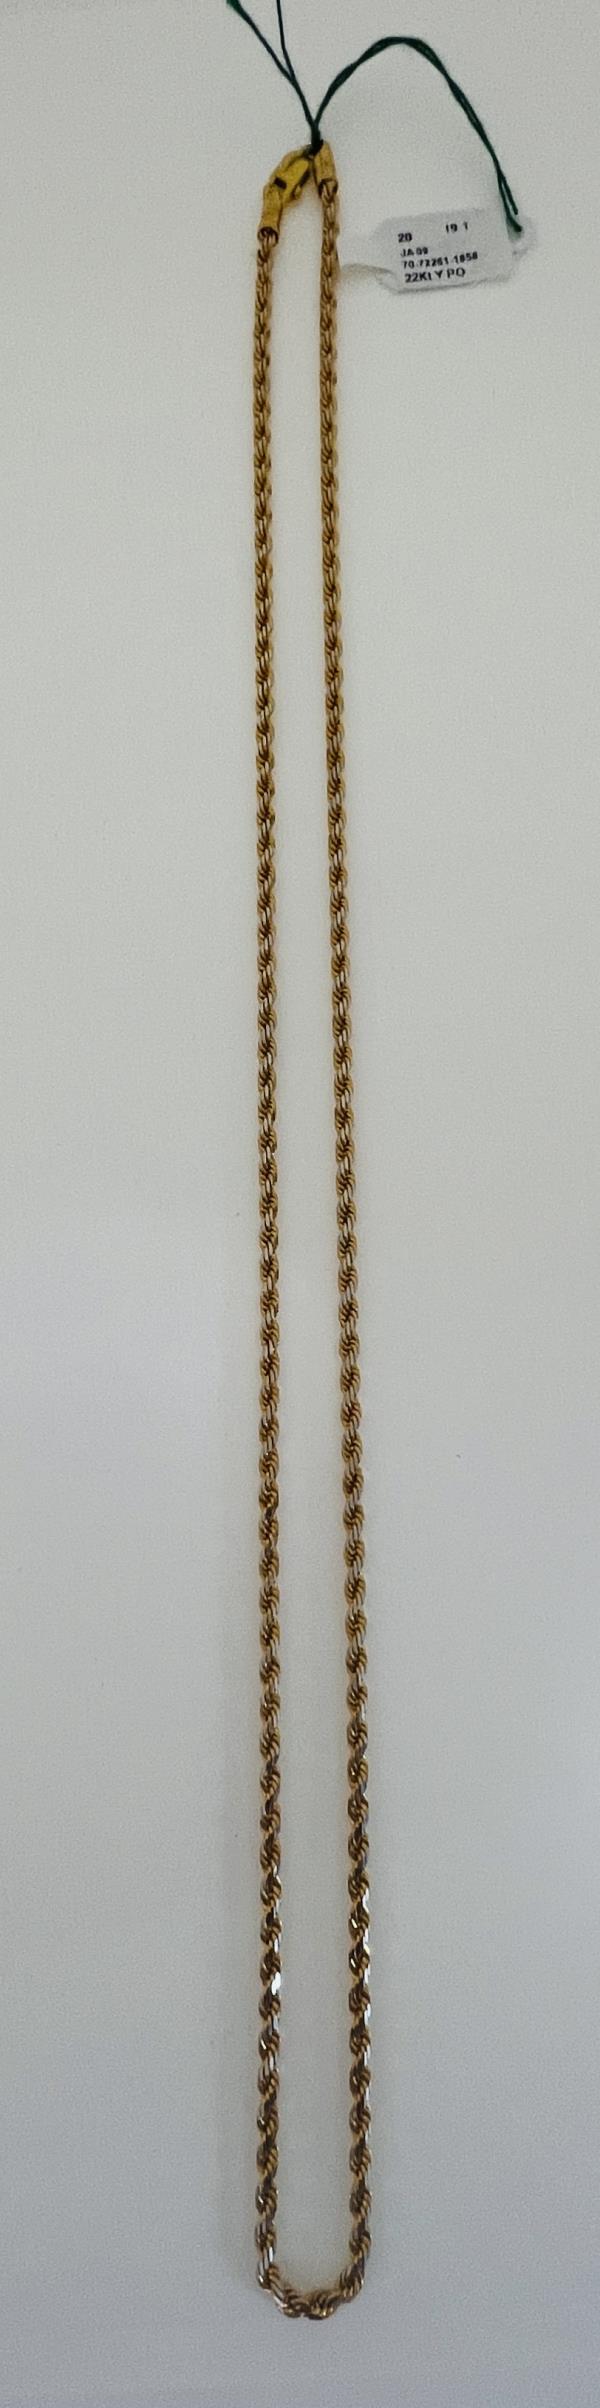 22KT GOLD CHAIN 20" 19.1GM